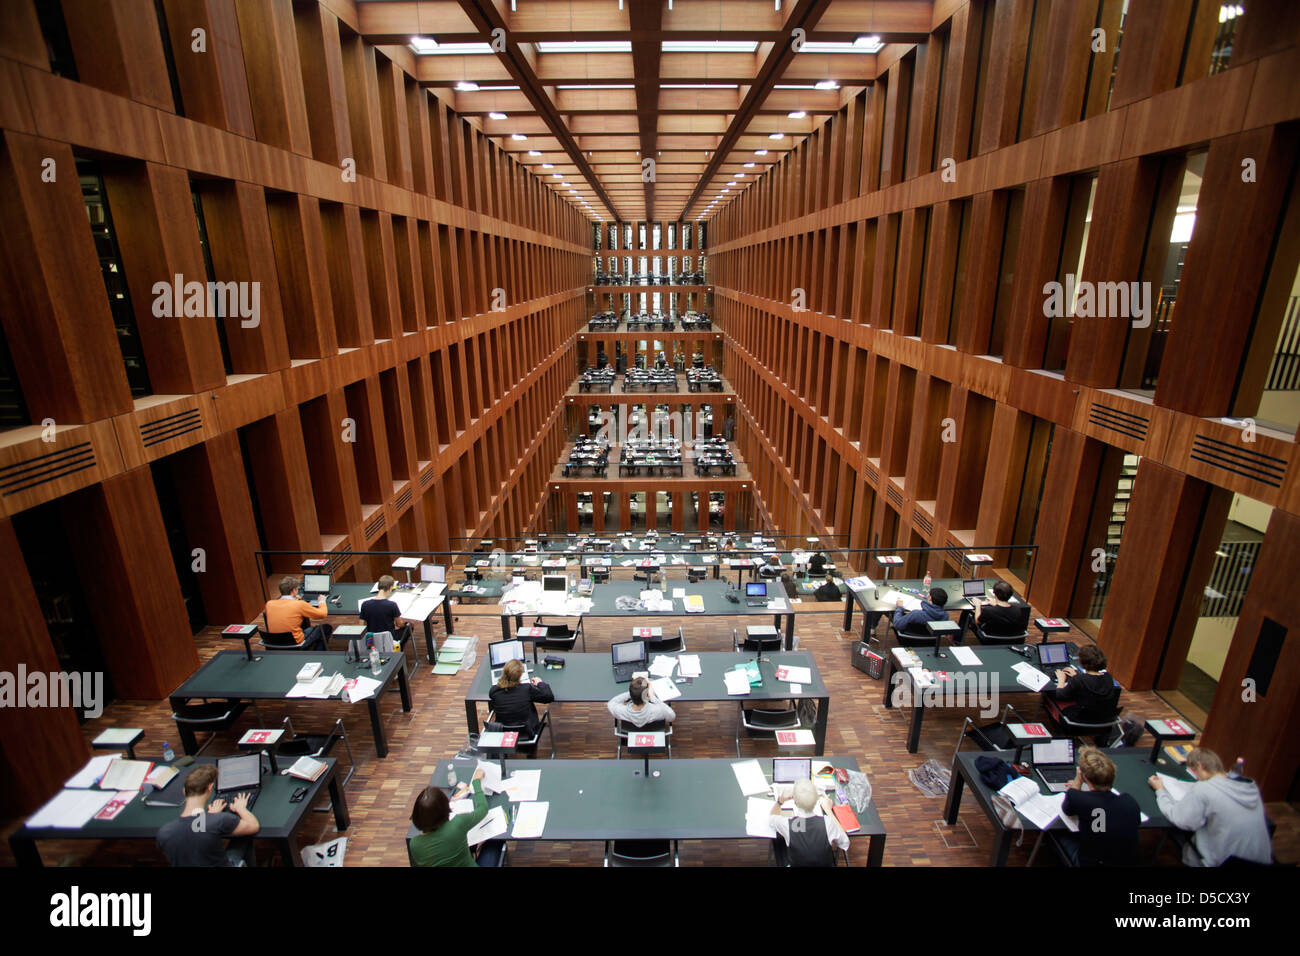 Berlin, Germany, the reading room at the Jacob and Wilhelm Grimm Center Stock Photo